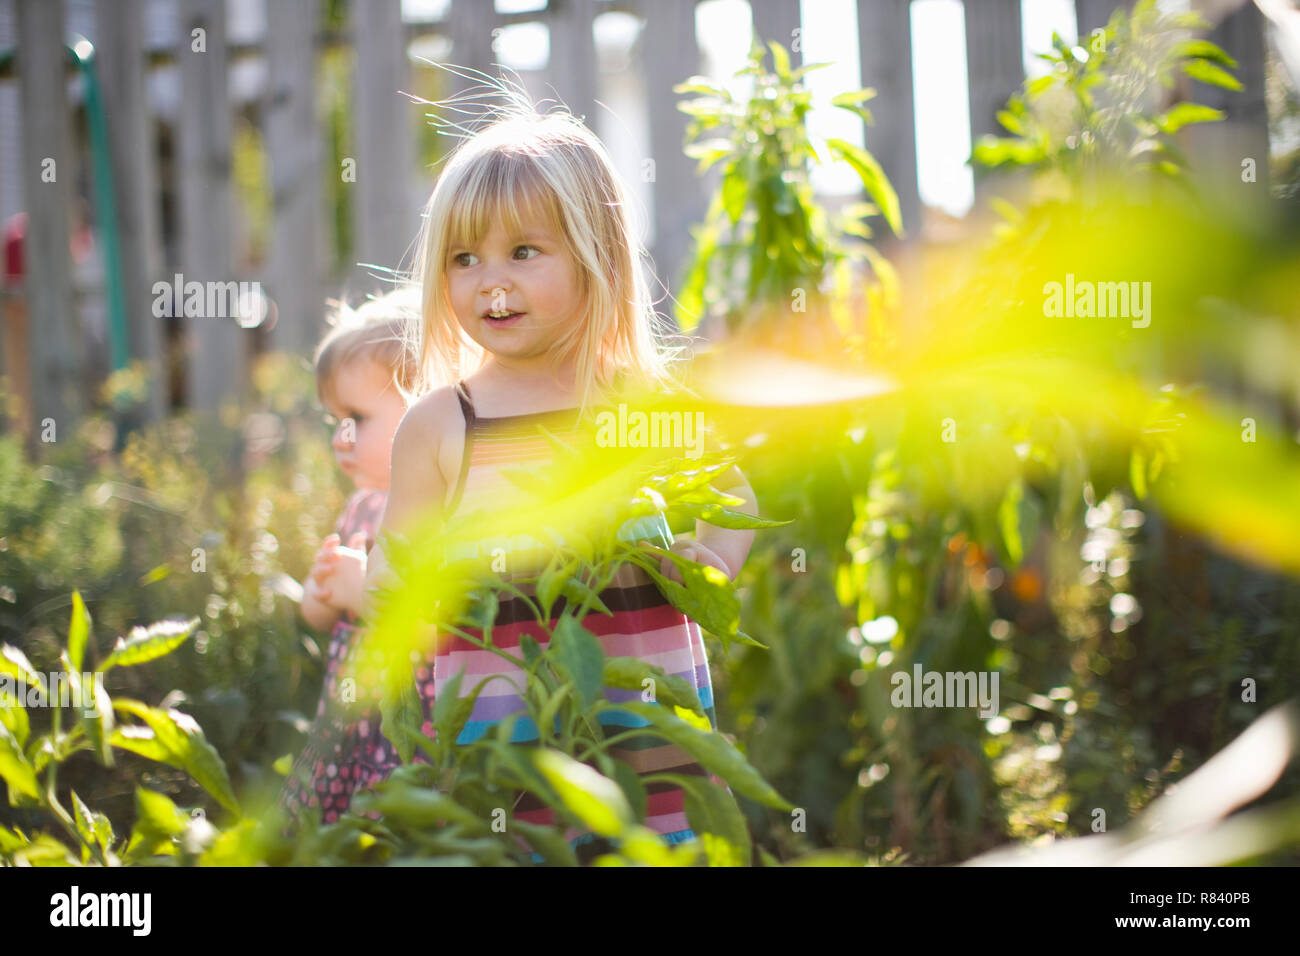 Little girls playing in garden Banque D'Images